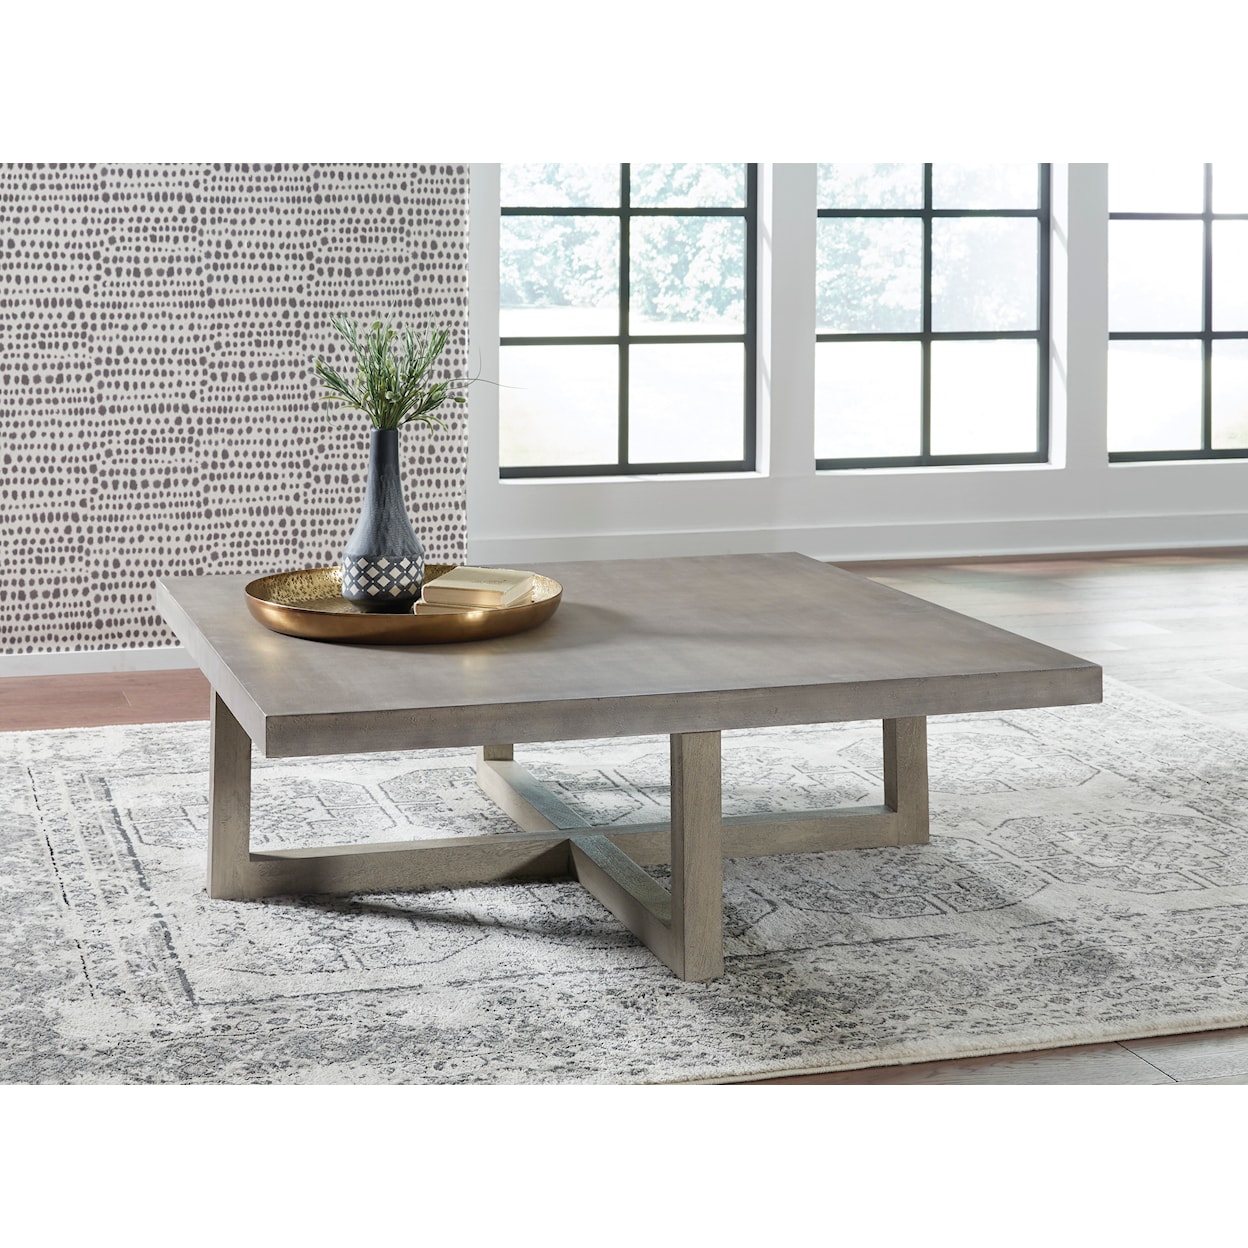 Signature Design by Ashley Lockthorne Coffee Table